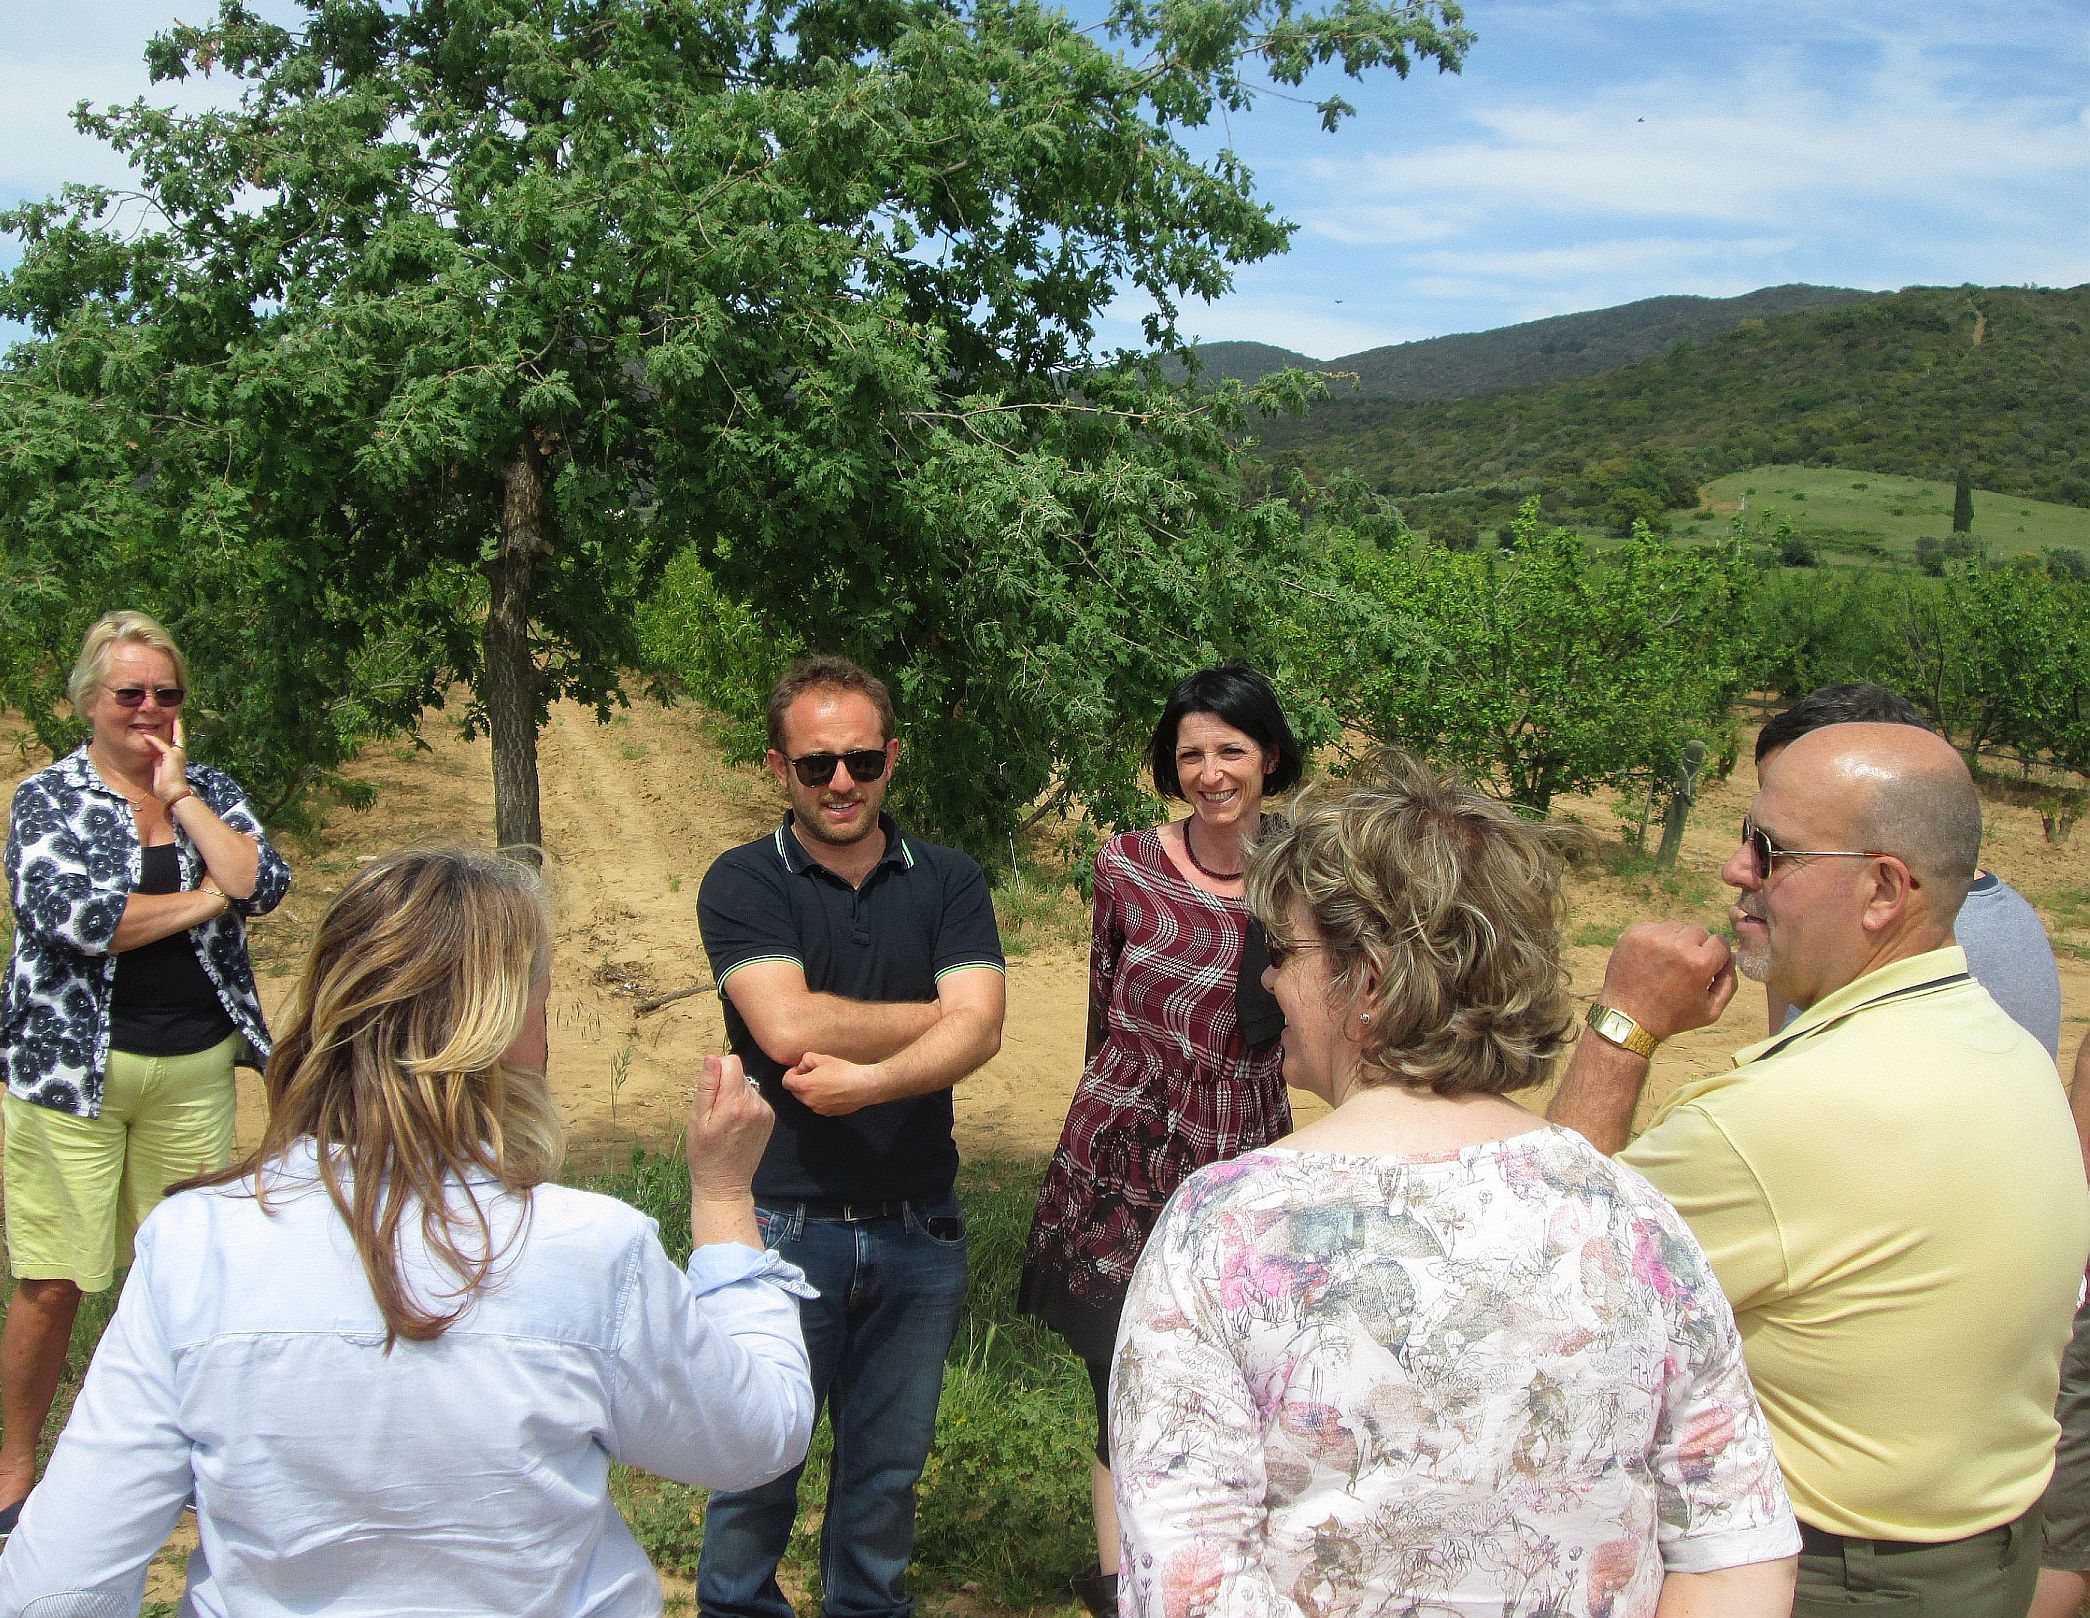 The group was given a guided tour of the cellars and the vines at La Mortelle Vineyard. The group was given the your of the vines by the vineyard’s agronomist, Onfrio Visciona (Left) and the vineyard’s tour guide, Valentina Bernini (Right)